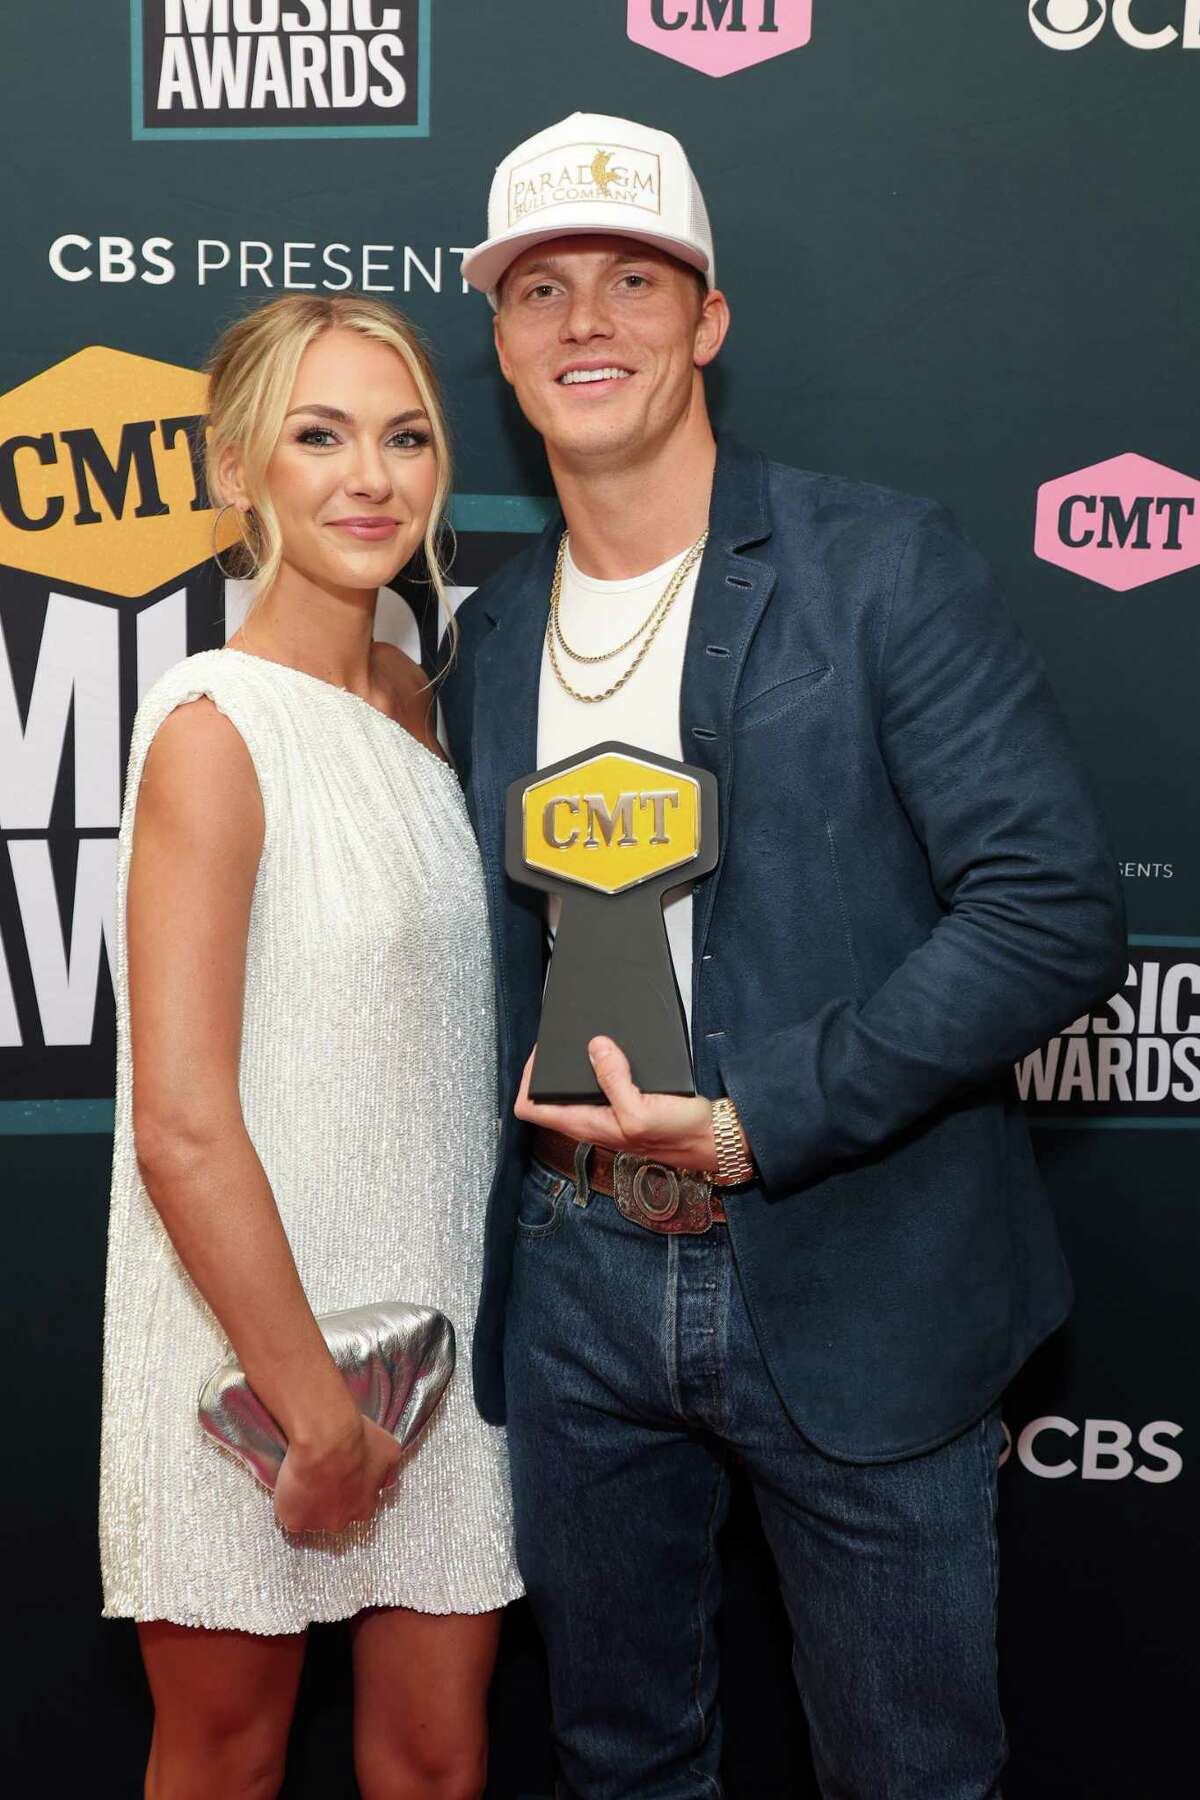 Hallie Ray Light and Parker McCollum attend the 2022 CMT Music Awards at Nashville Municipal Auditorium on April 11, 2022 in Nashville, Tennessee.